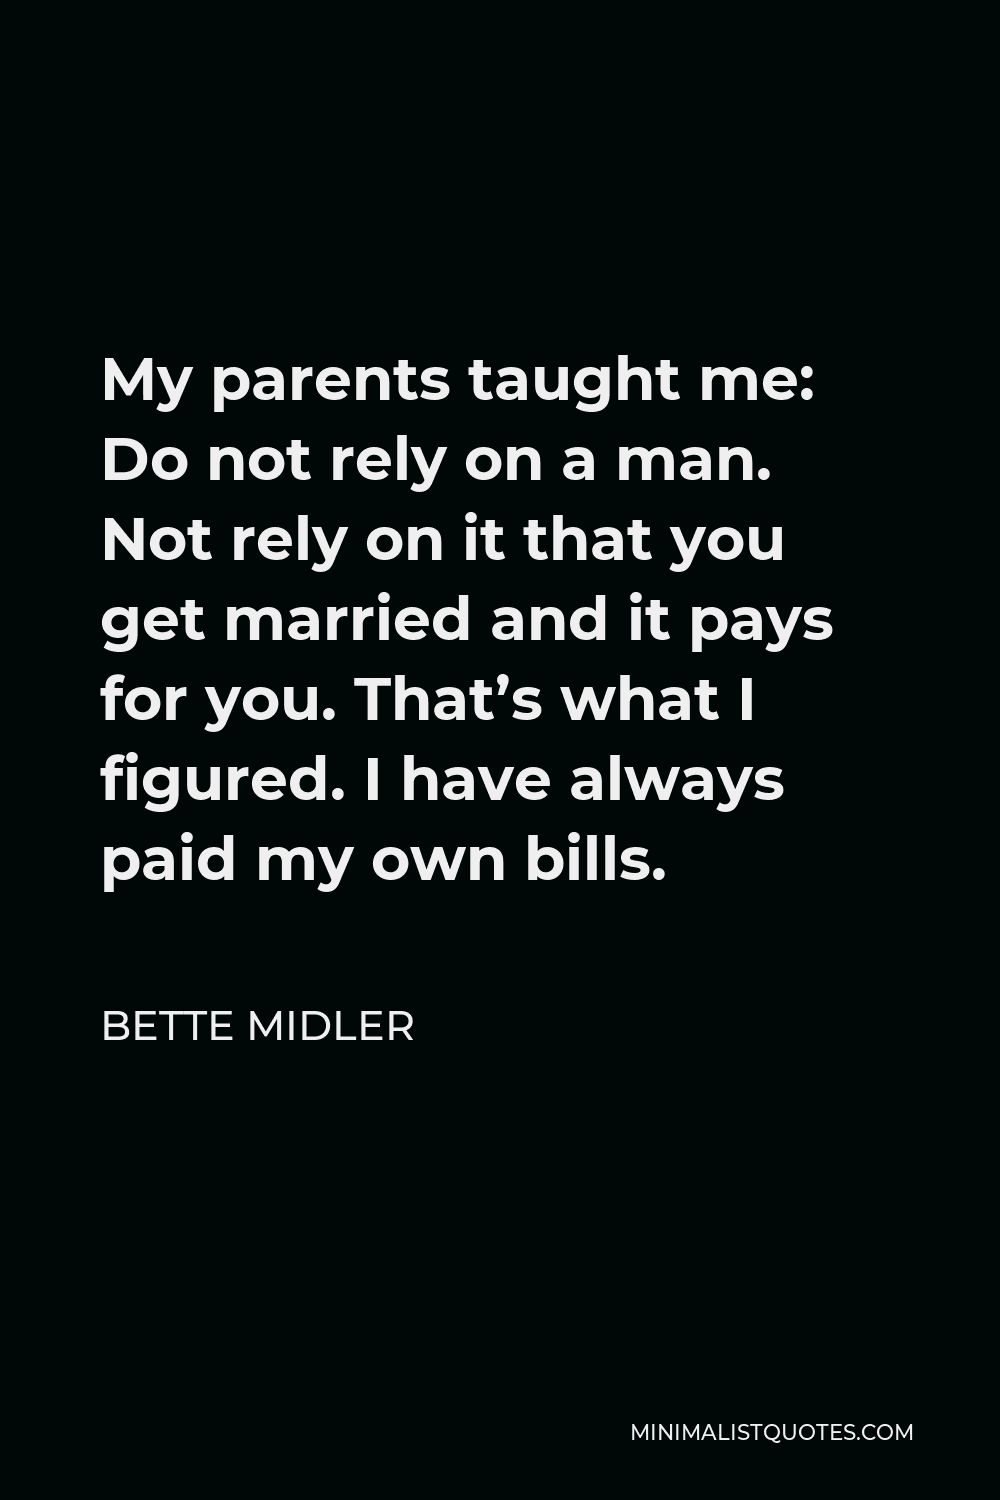 Bette Midler Quote - My parents taught me: Do not rely on a man. Not rely on it that you get married and it pays for you. That’s what I figured. I have always paid my own bills.